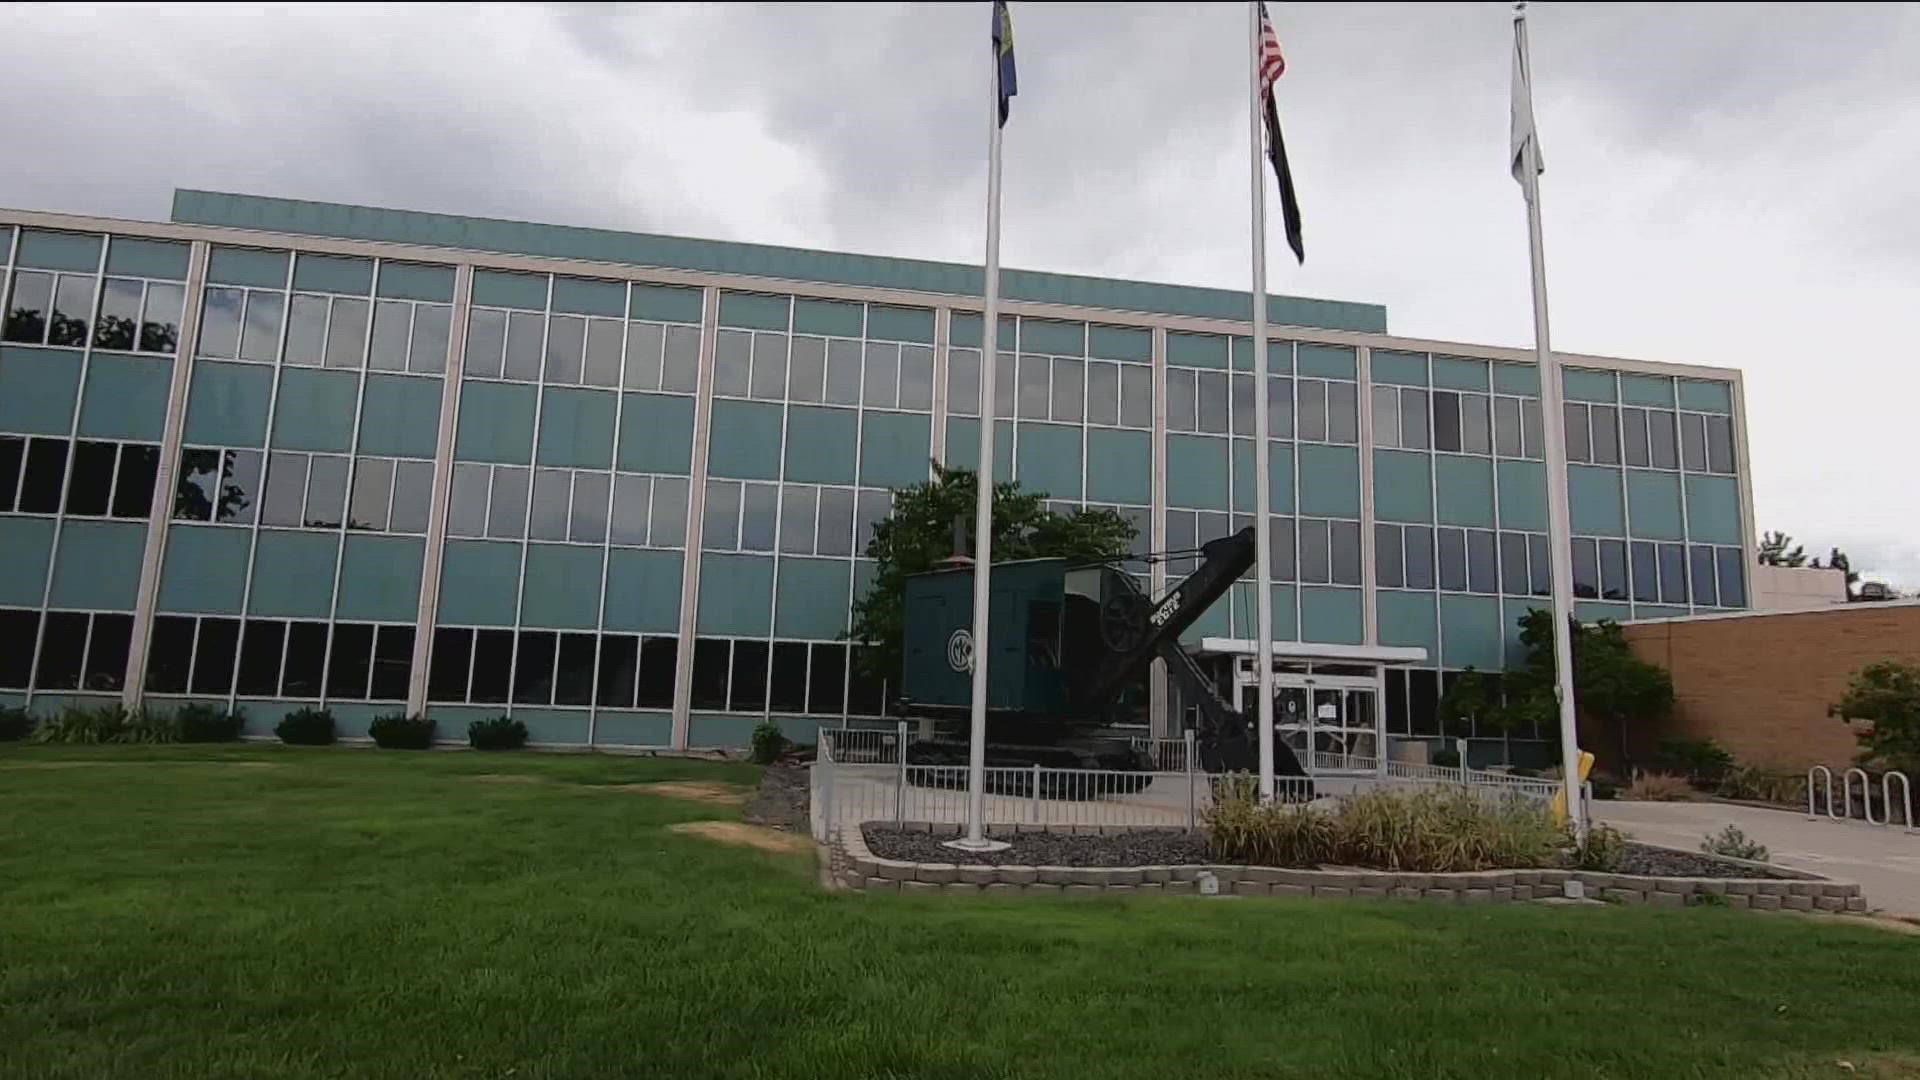 Idaho Transportation Department voted to sell its headquarters building on State Street and will be permanently located at the State of Idaho Chinden Campus.